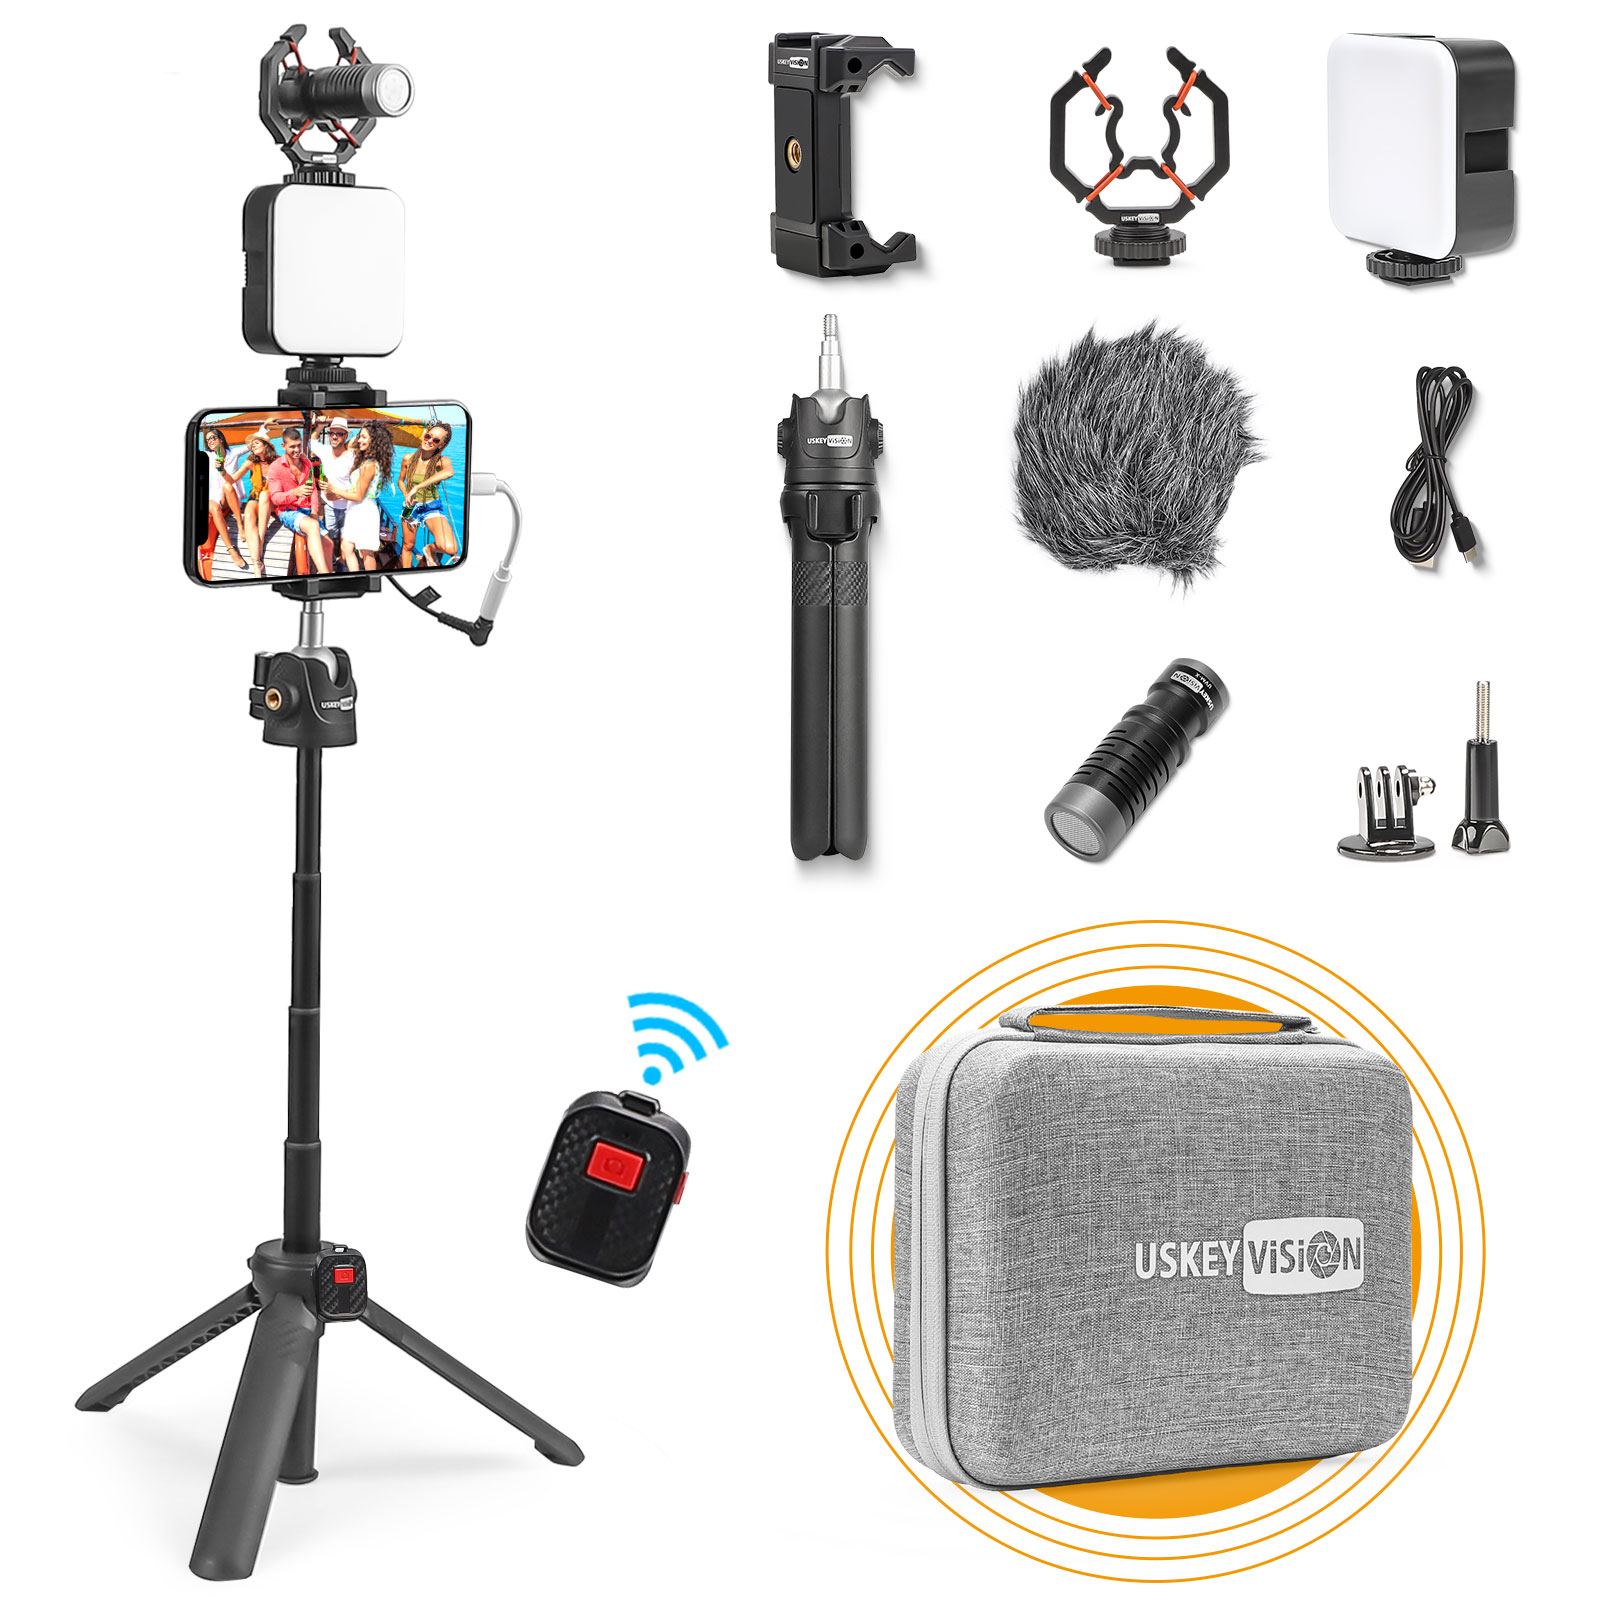 E-K2 Remo Extendable Smartphone Video Vlogging Kit with Remote